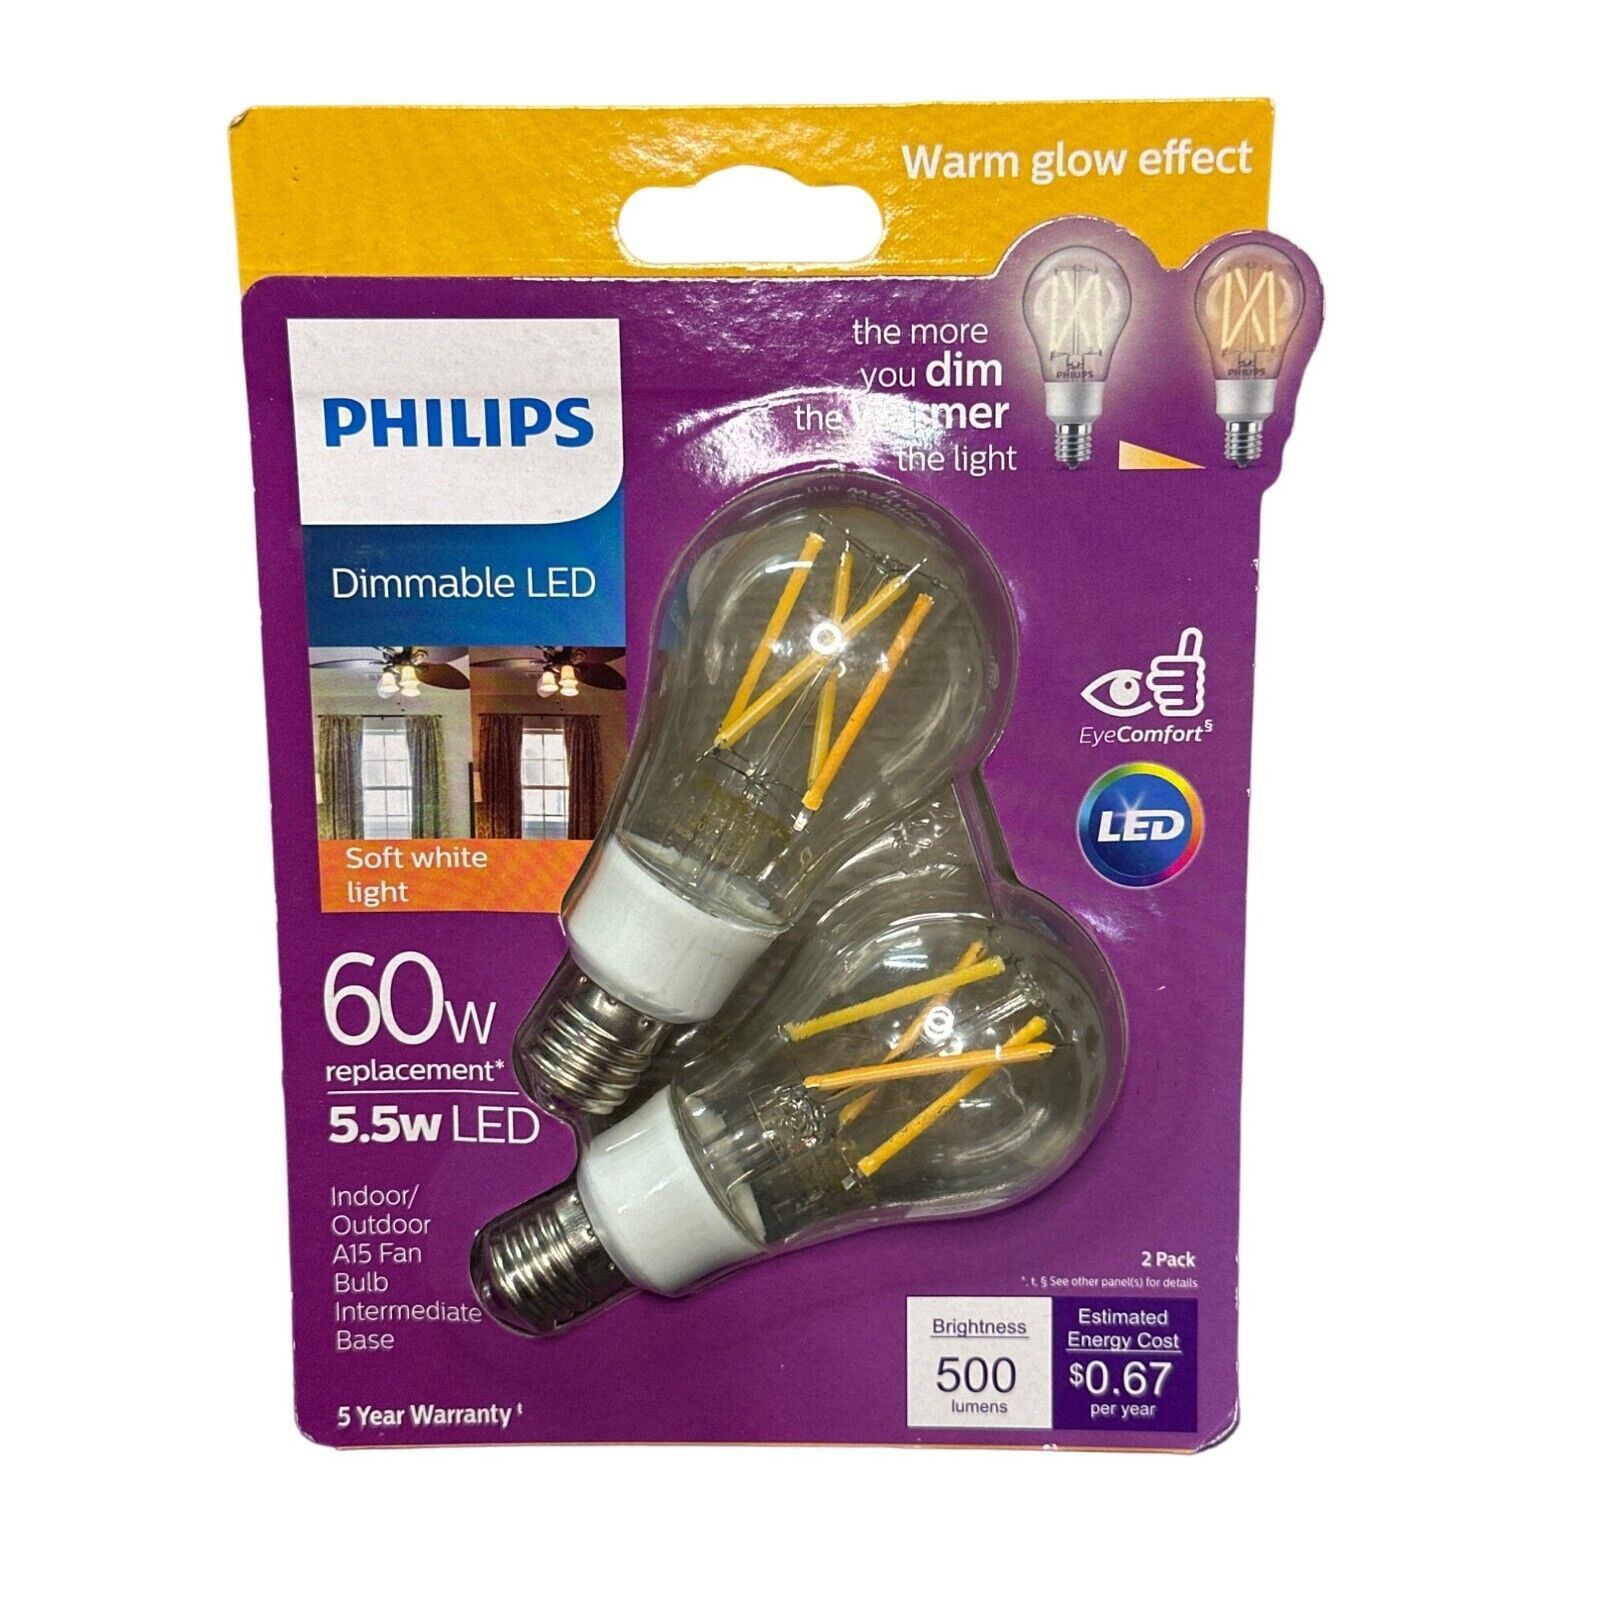 Primary image for Phillips 2pk Dimmable 60w LED Bulb, Indoor/Outdoor A15 Fan Light to Warm